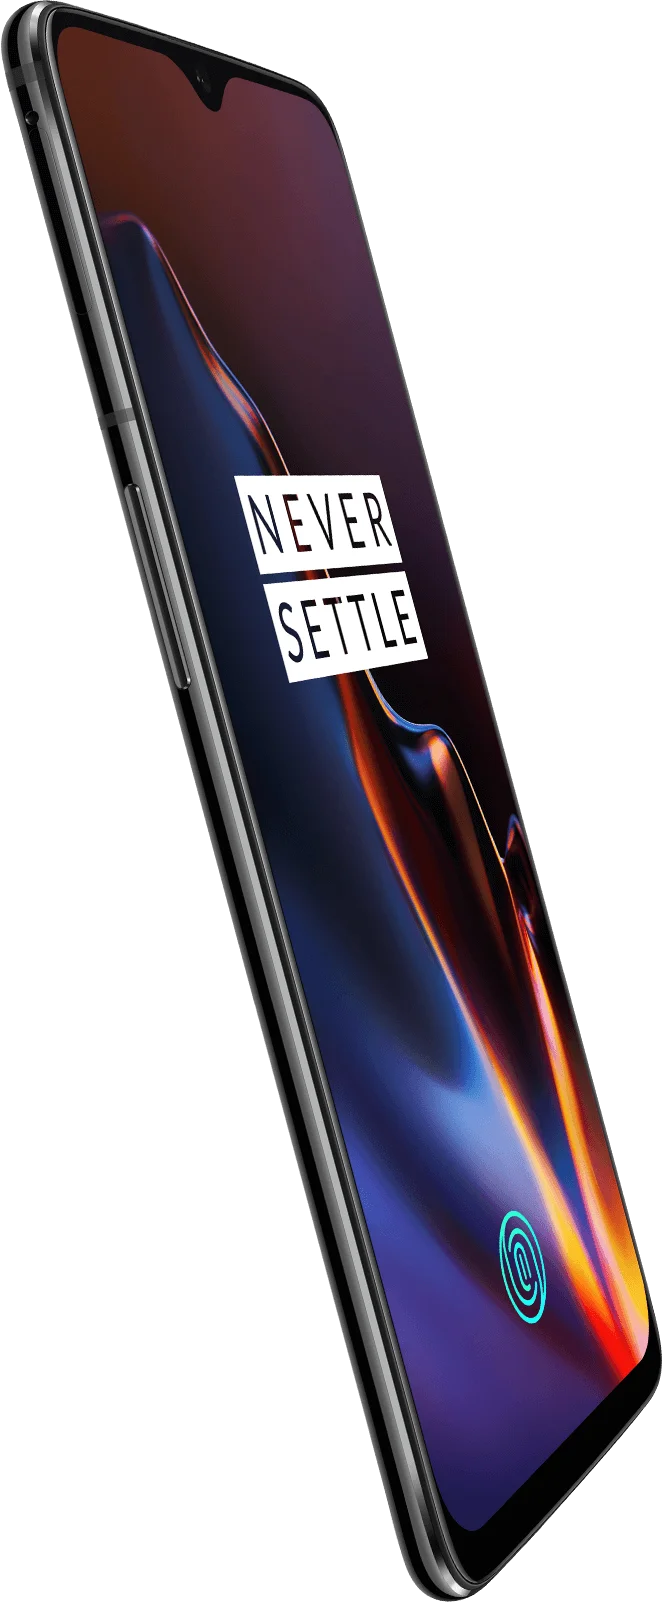 OnePlus 6T official